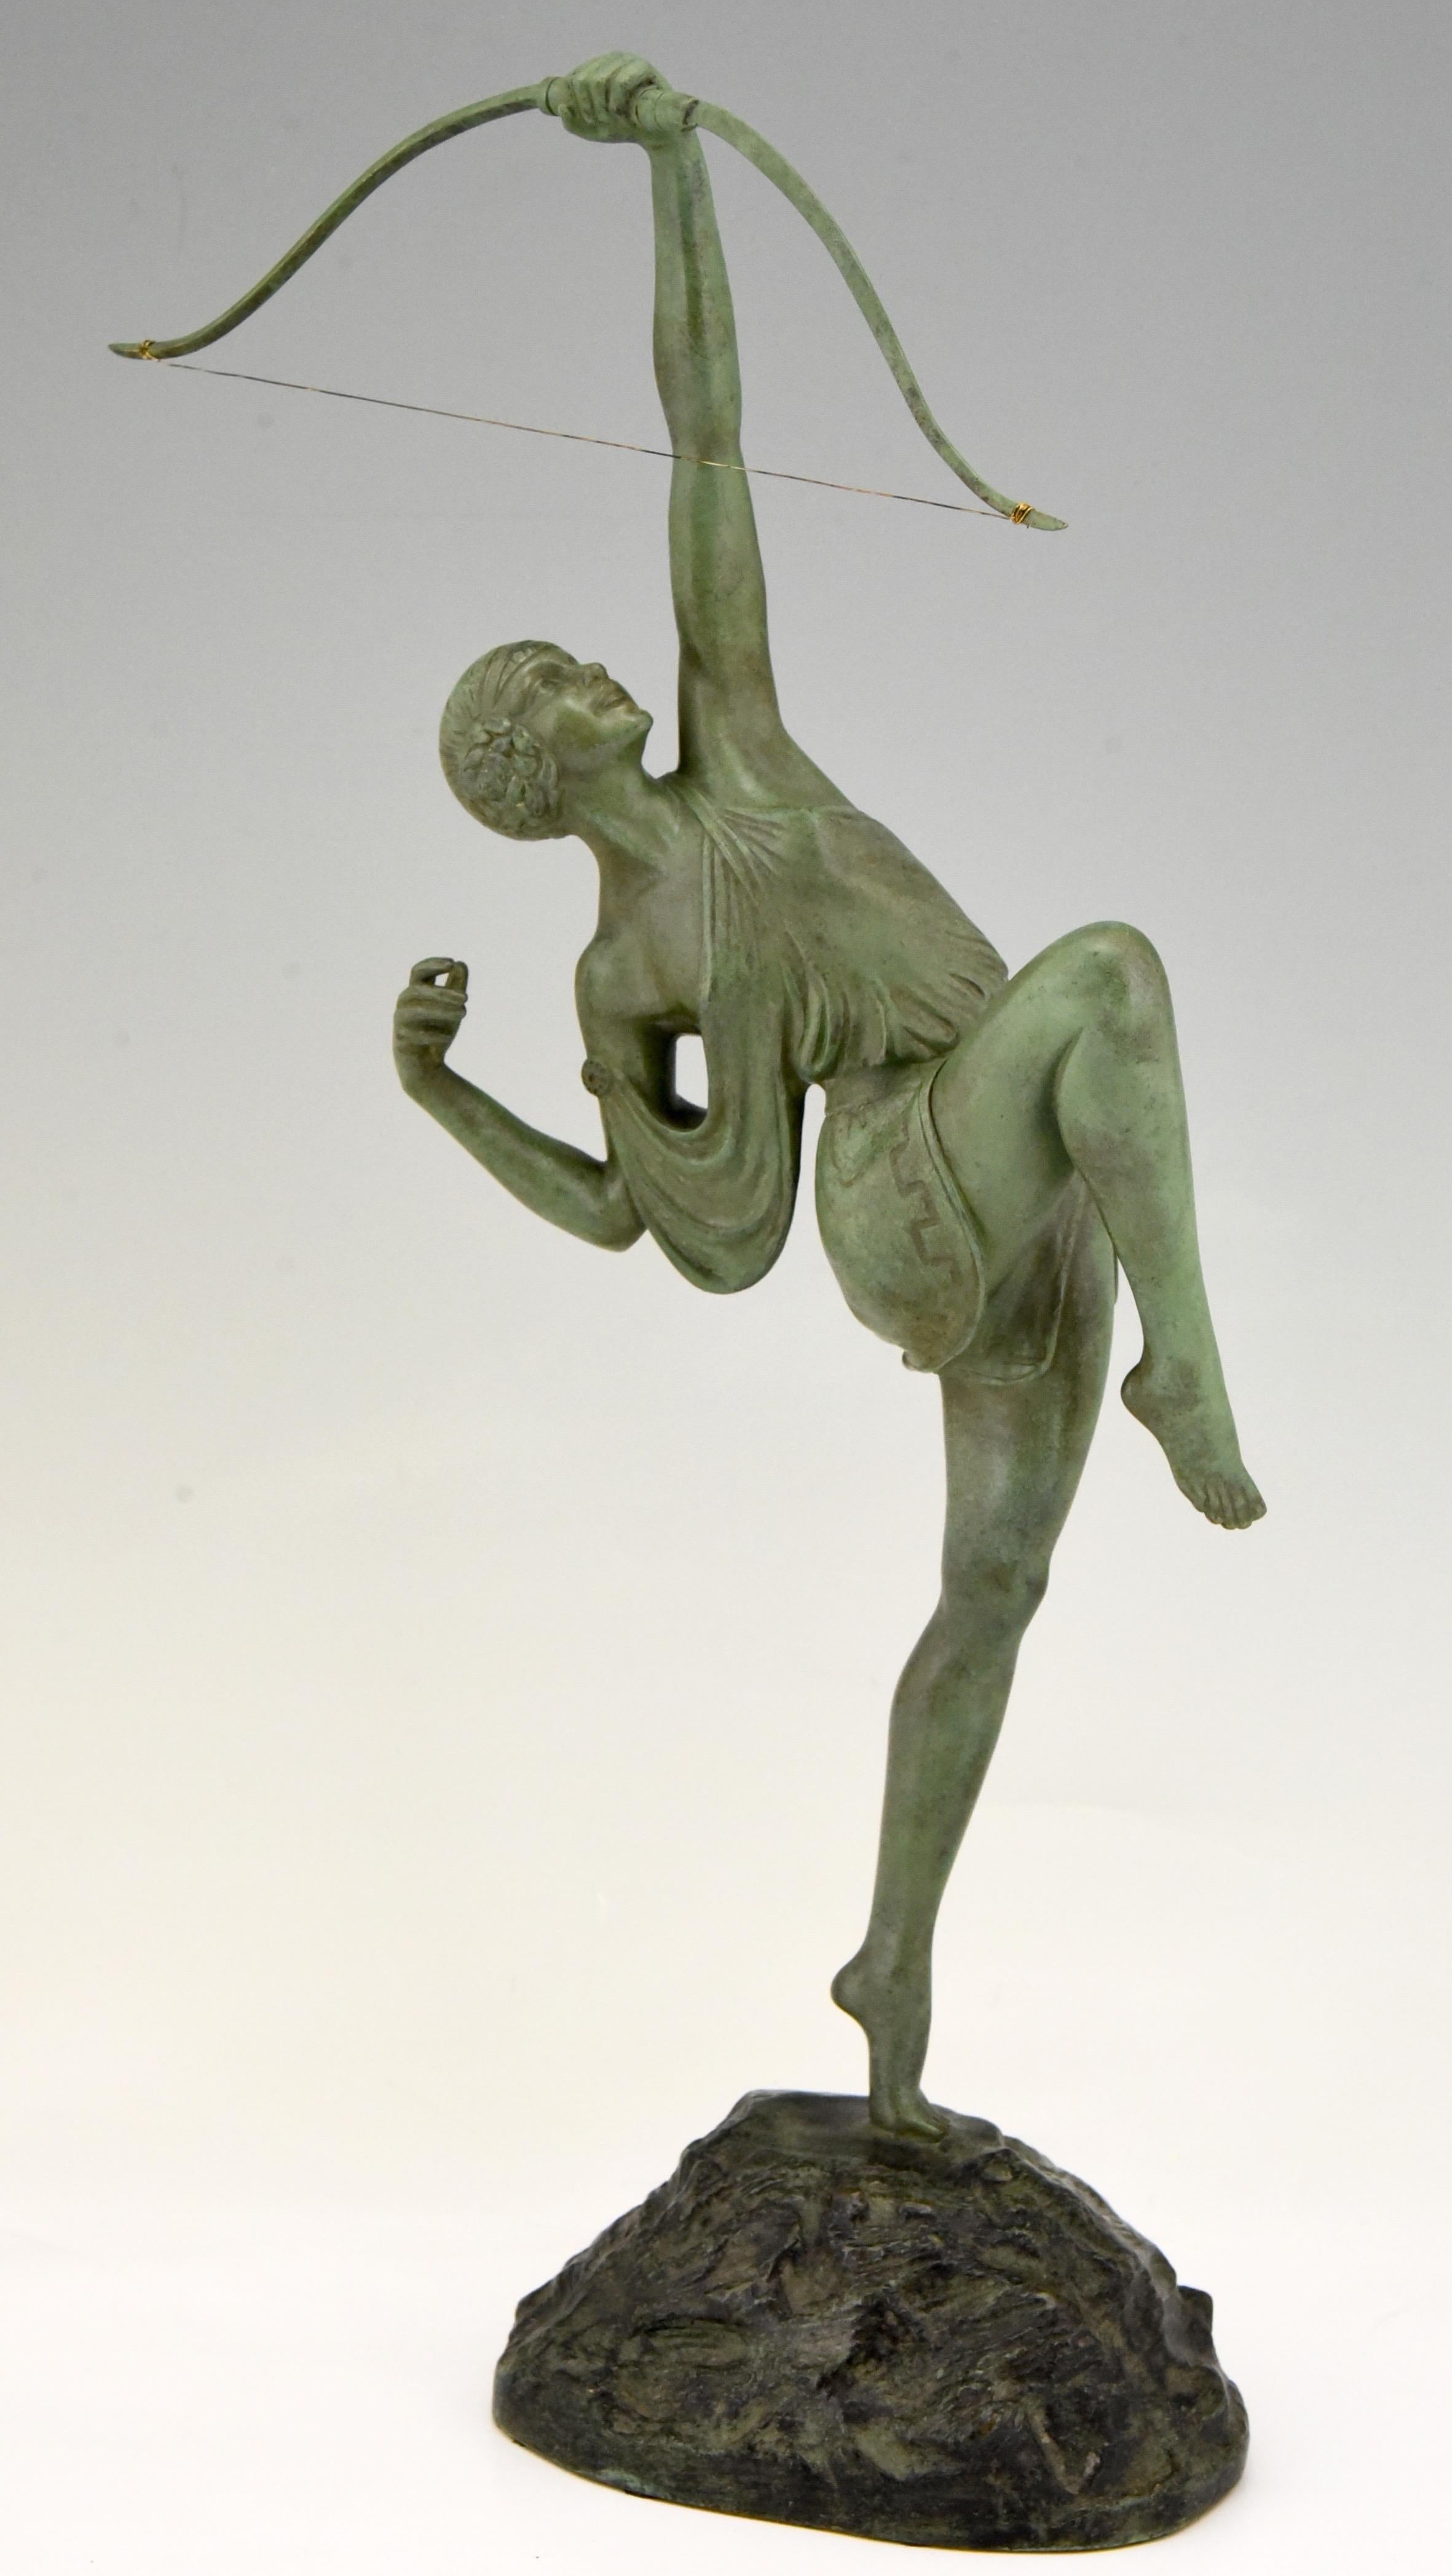 Art Deco bronze of a woman archer, Diana with bow by the famous French artist Pierre Le Faguays, the bronze is signed on the base and bears the Susse Frères foundry seal as well as the founders' signature, France, 1925. The sculpture has a green